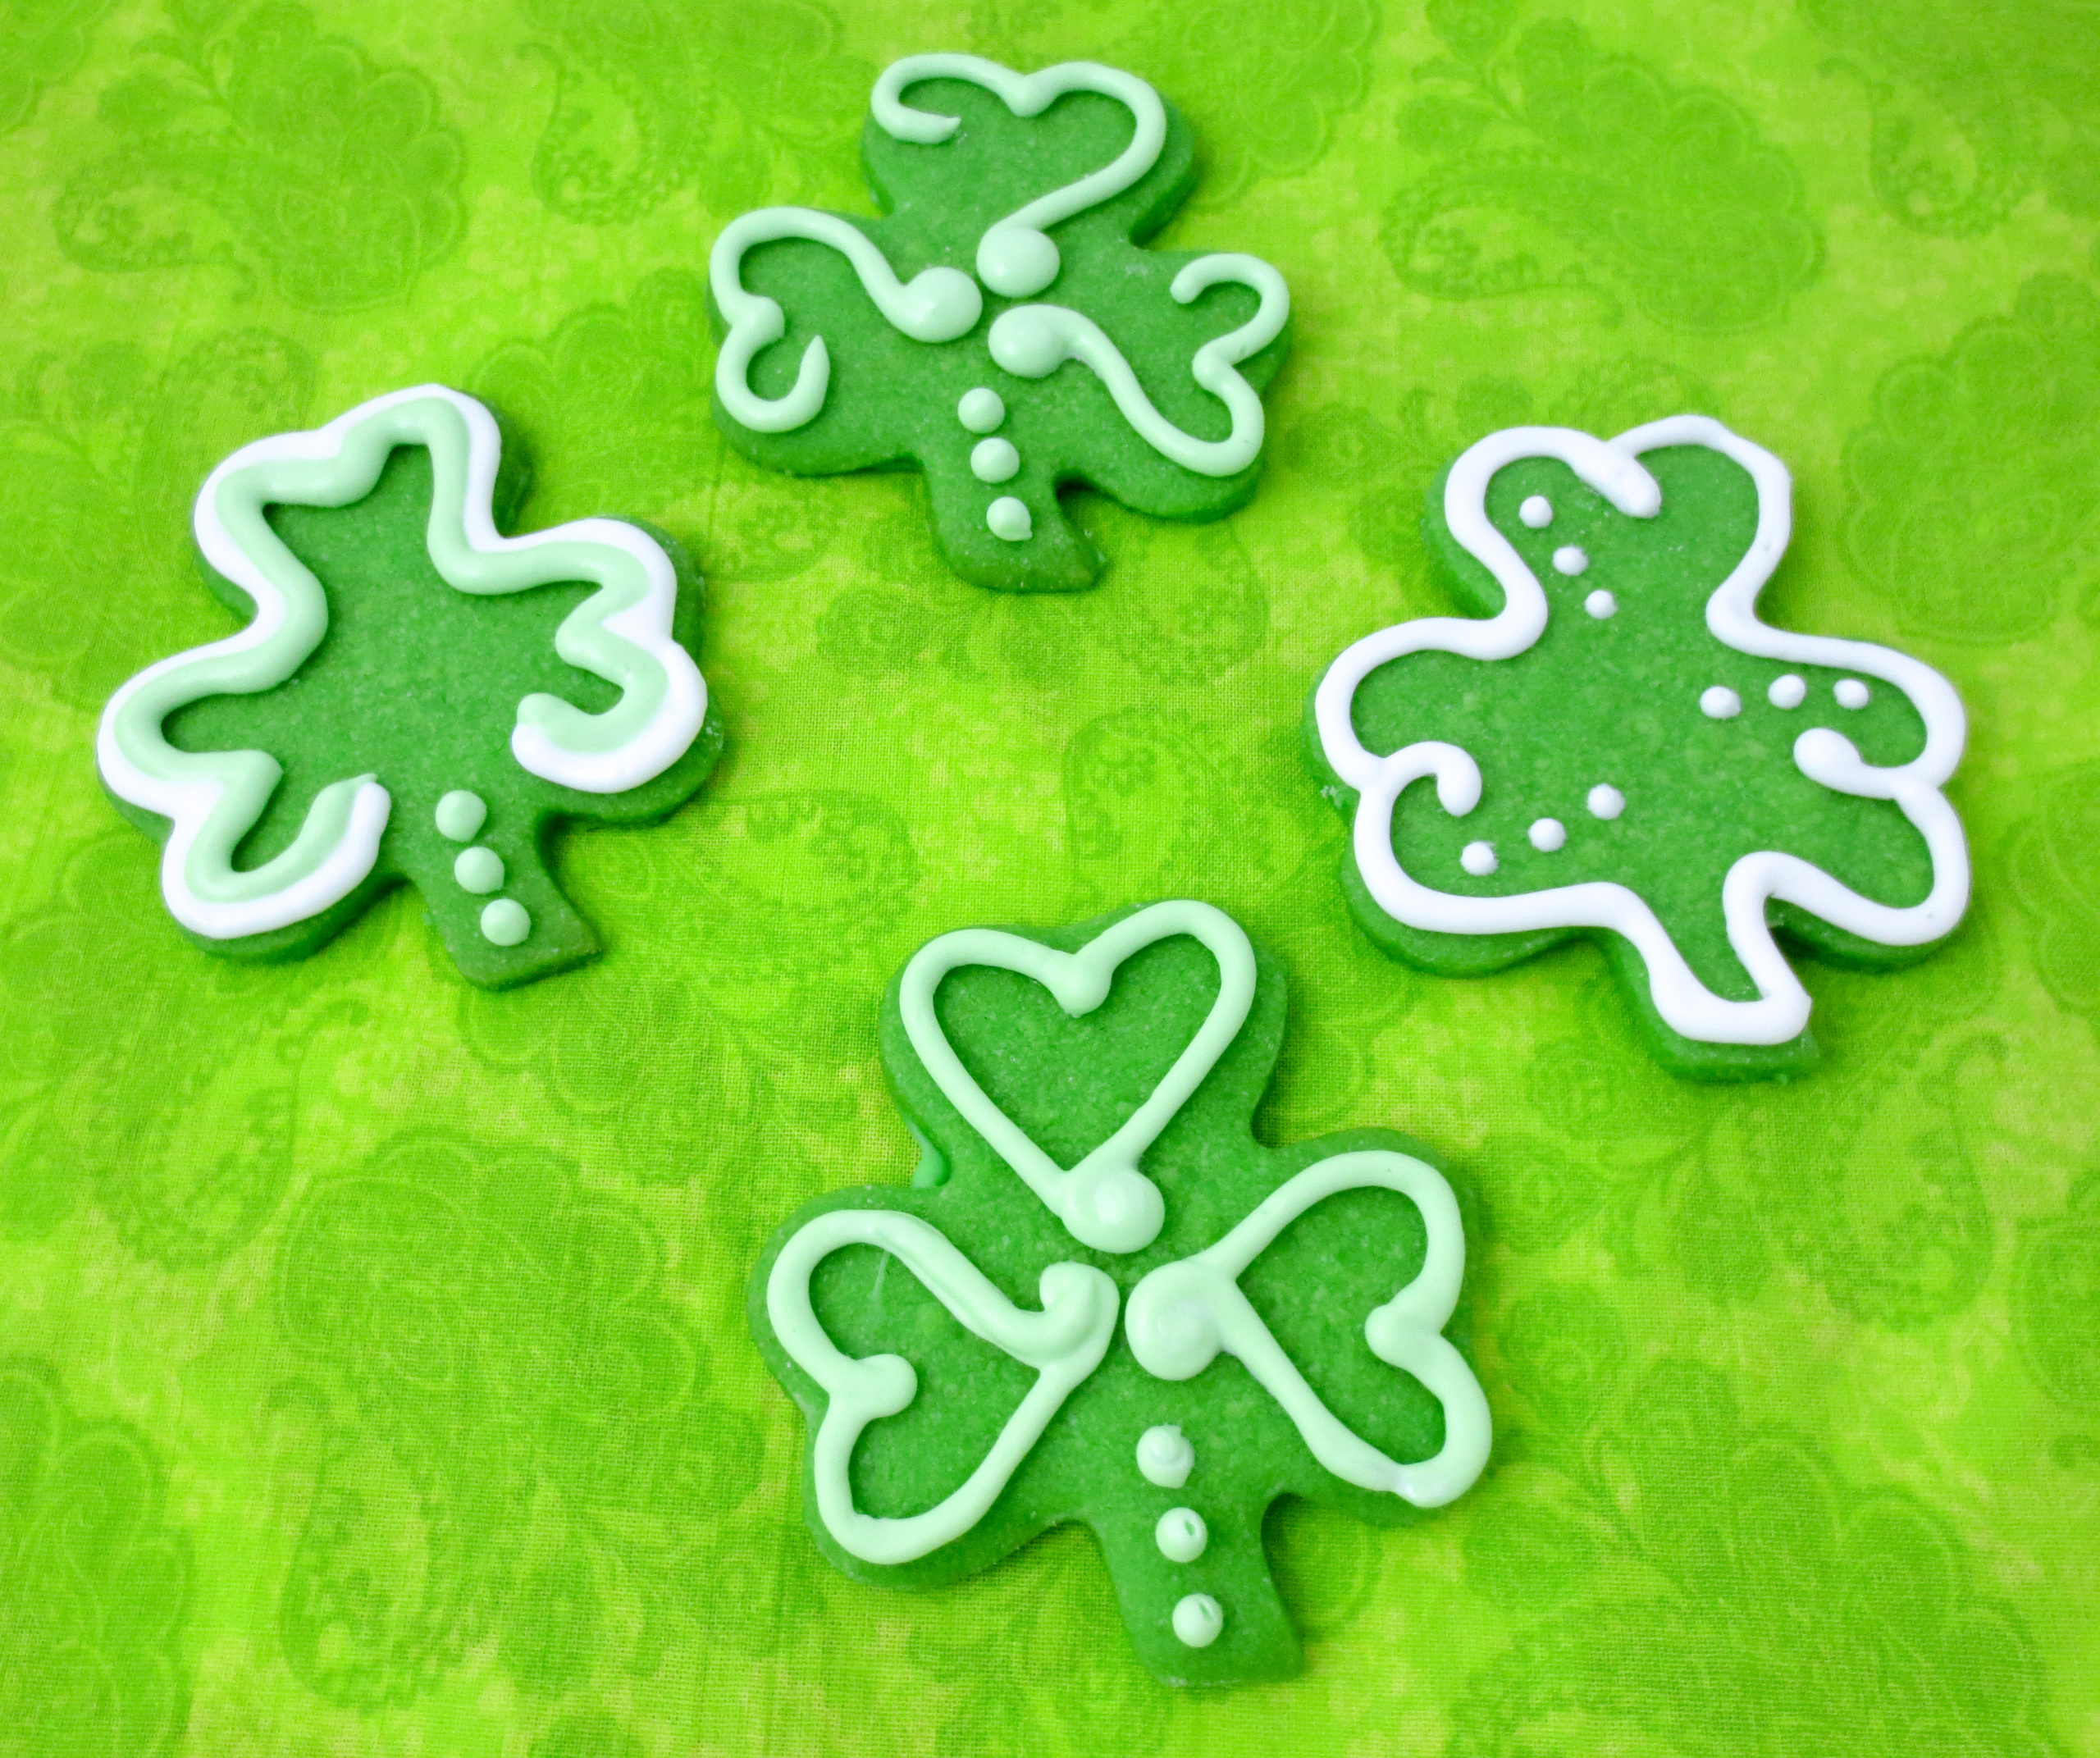 Shamrock cookies are mint-flavored sugar cookies decorated with royal icing (and/or sprinkles) in the quintessential St. Patrick’s Day shape. They are sure to bring a smile and good luck to everyone you share them with! Recipe developed by Cinnamon & Sugar for Deborah Garner, author of A FLAIR FOR SHAMROCKS. 